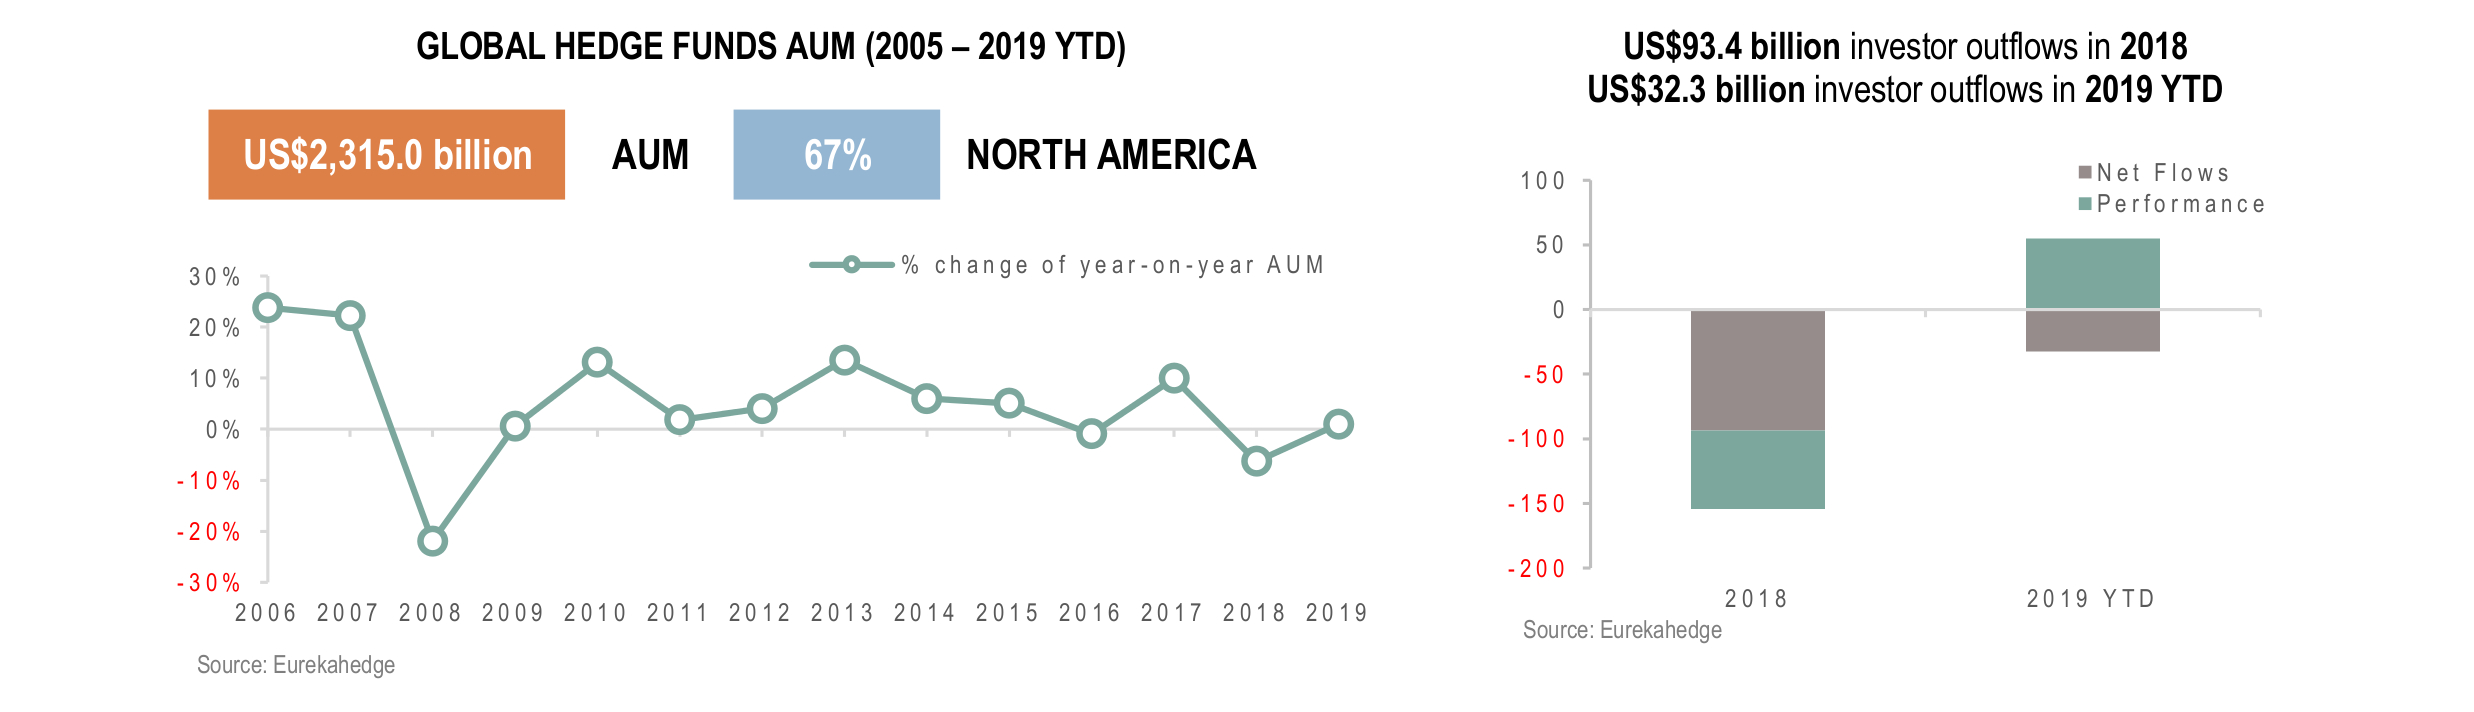 Global Hedge Funds Infographic April 2019 - AUM